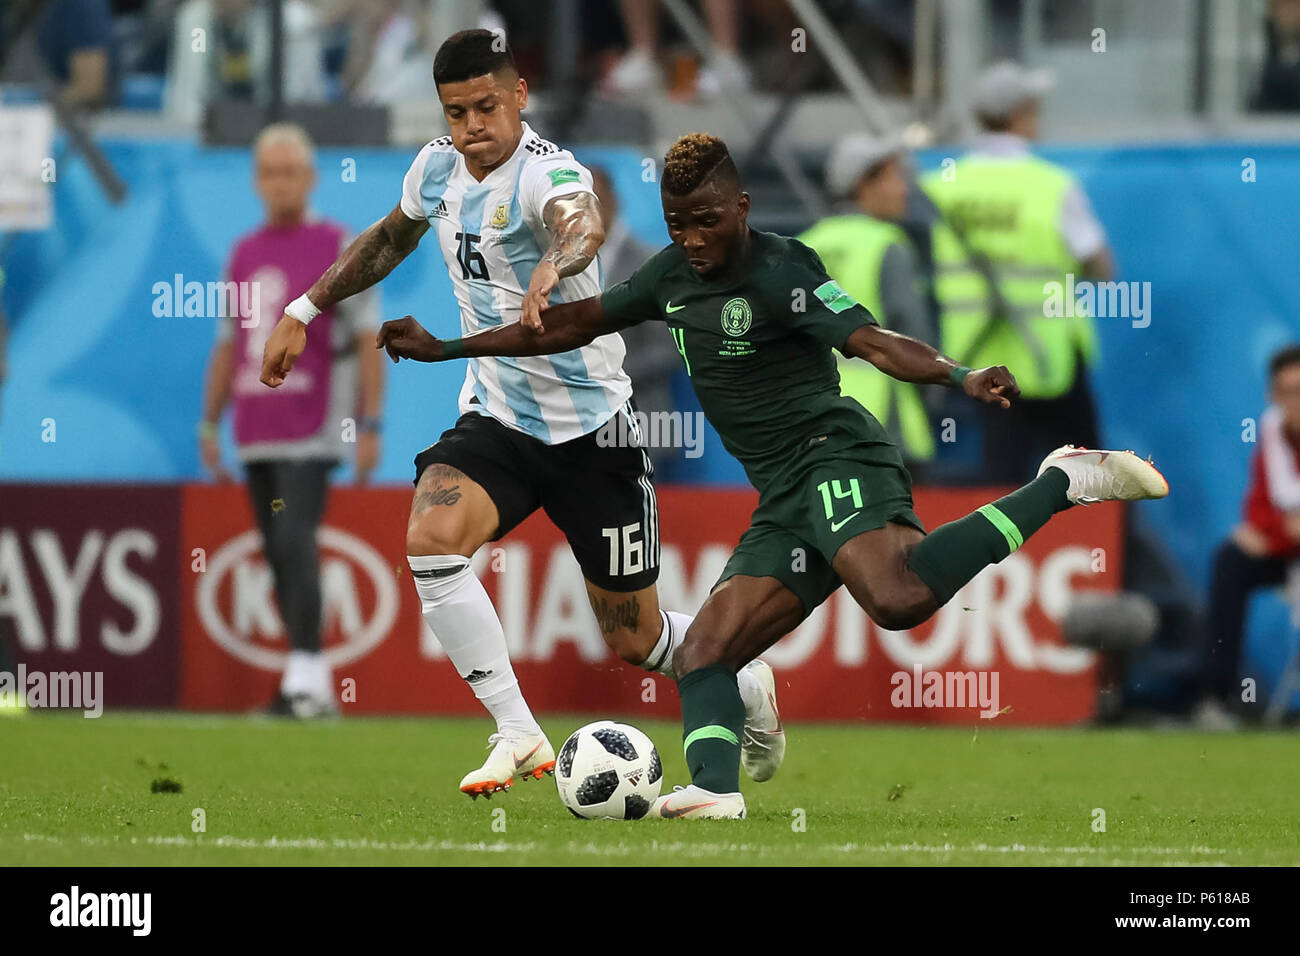 St Petersburg, Russia. 26th Jun, 2018. Marcos Rojo of Argentina and Kelechi Iheanacho of Nigeria during the 2018 FIFA World Cup Group D match between Nigeria and Argentina at Saint Petersburg Stadium on June 26th 2018 in Saint Petersburg, Russia. (Photo by Daniel Chesterton/phcimages.com) Credit: PHC Images/Alamy Live News Stock Photo